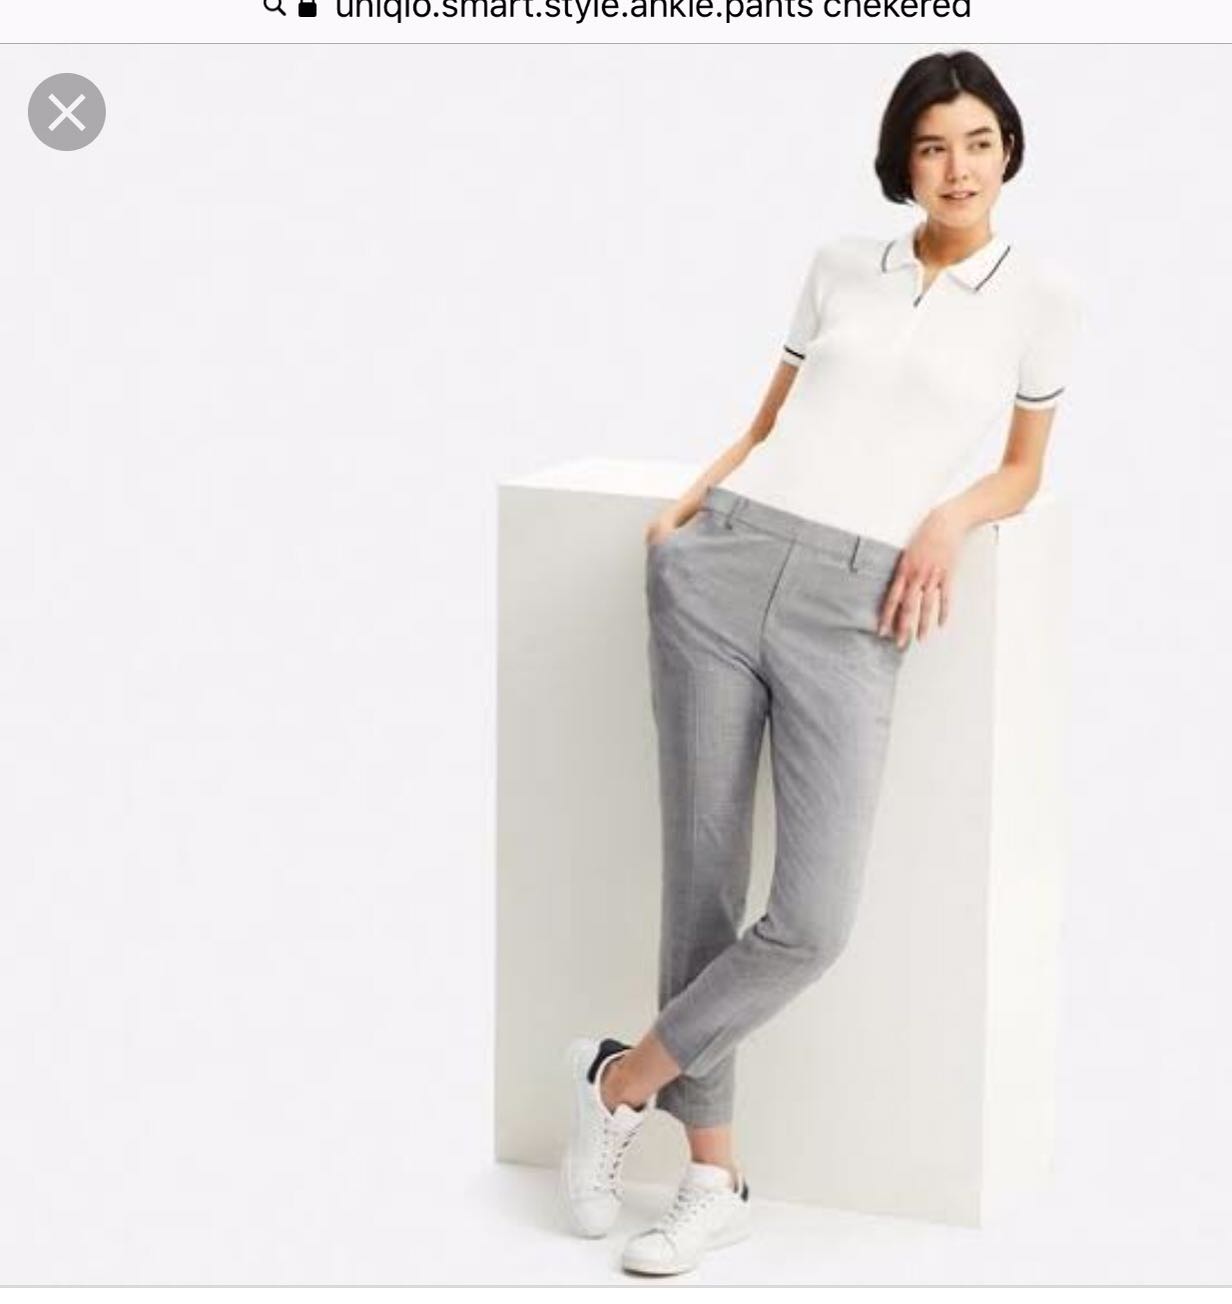 https://media.karousell.com/media/photos/products/2018/12/08/uniqlo_smart_style_ankle_pants_1544264871_7cac1018.jpg